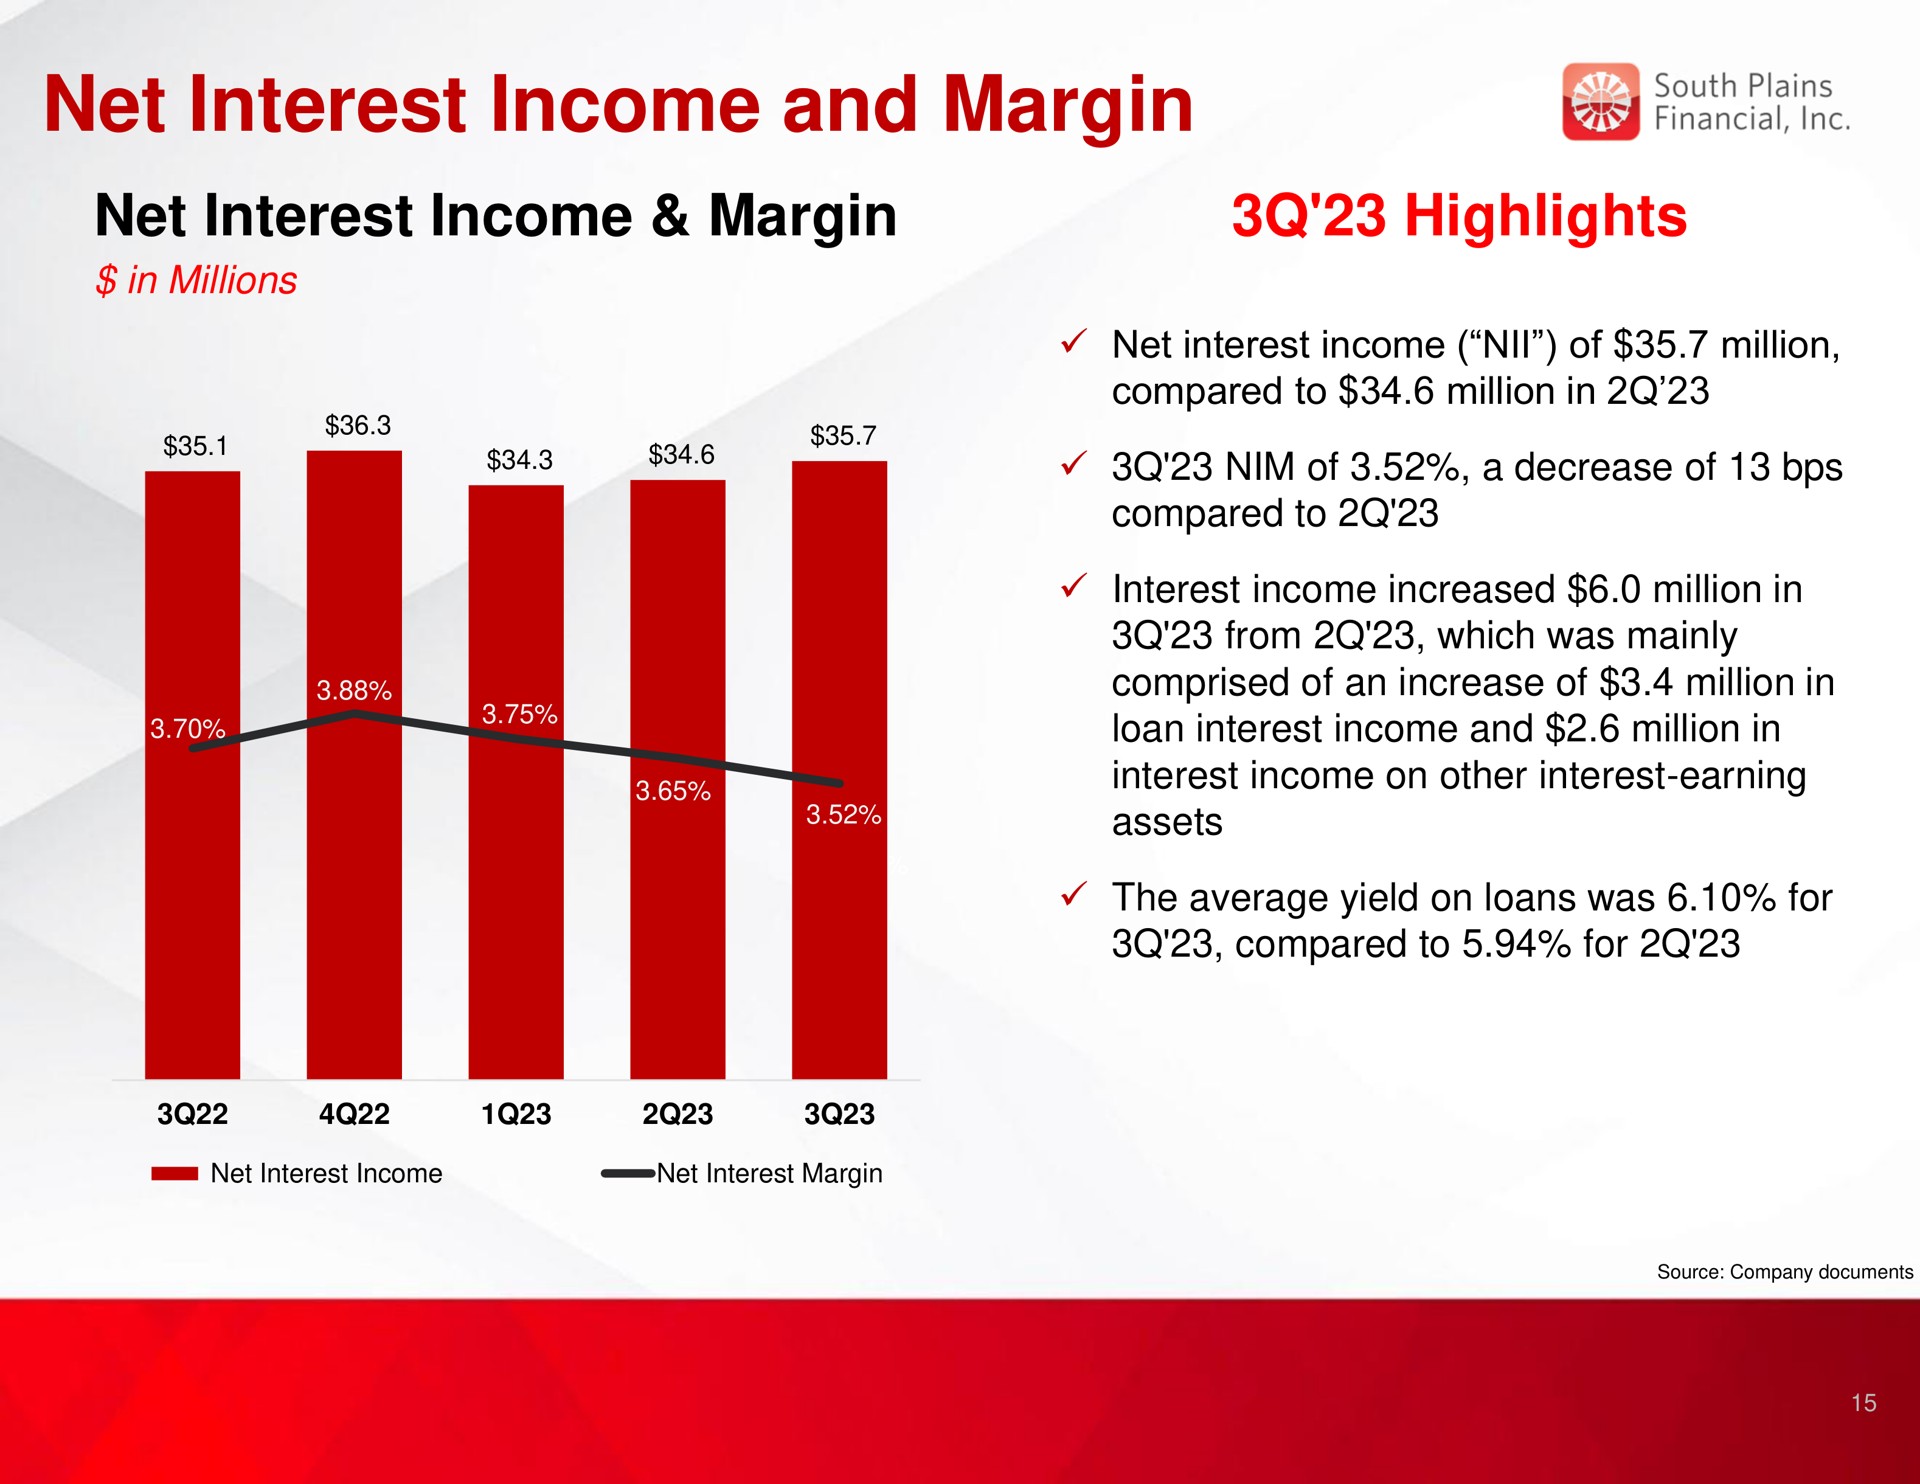 net interest income and margin net interest income margin highlights | South Plains Financial